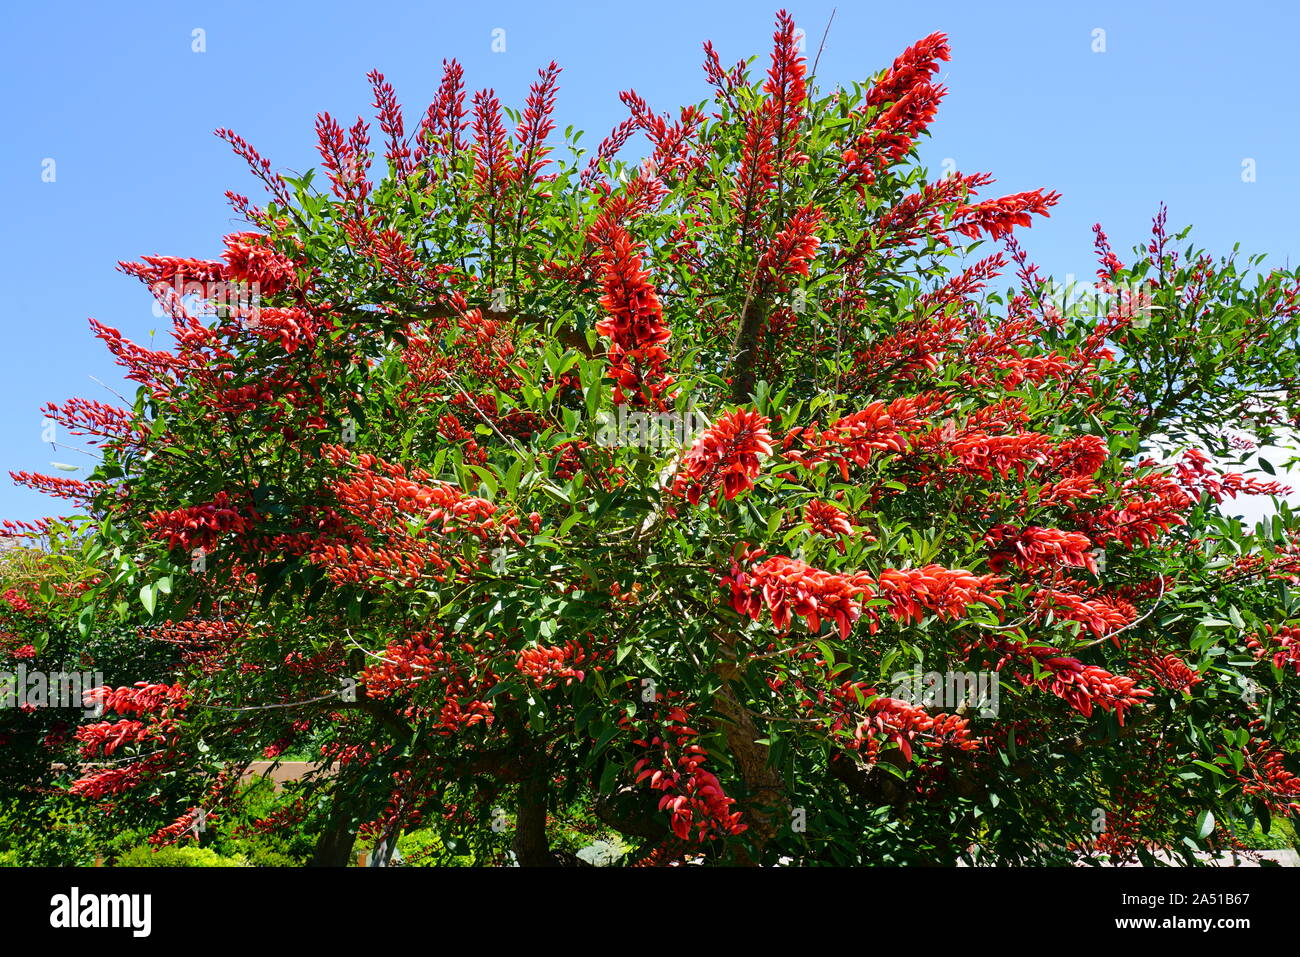 View of the red flowers of the Erythrina tree Stock Photo